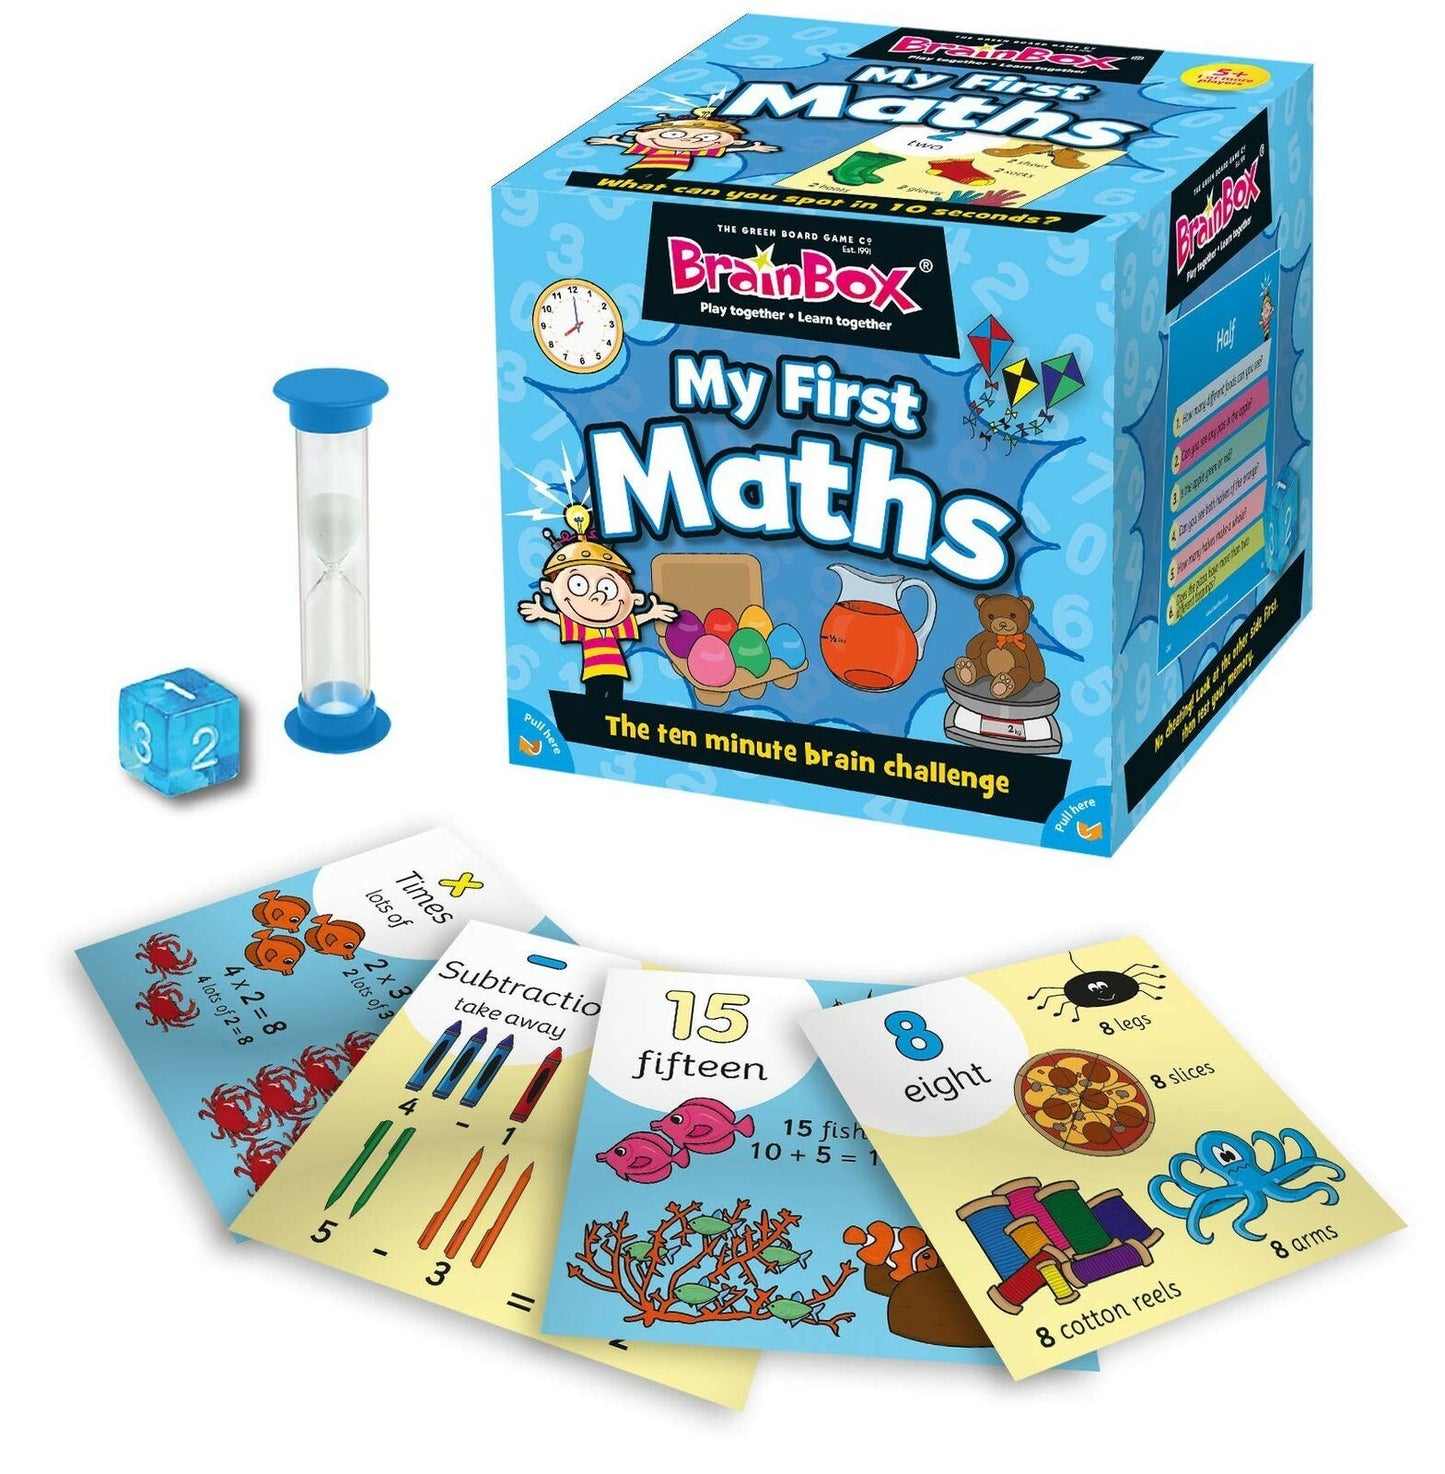 BrainBox MY FIRST MATHS Game - Play Together, Learn Together!